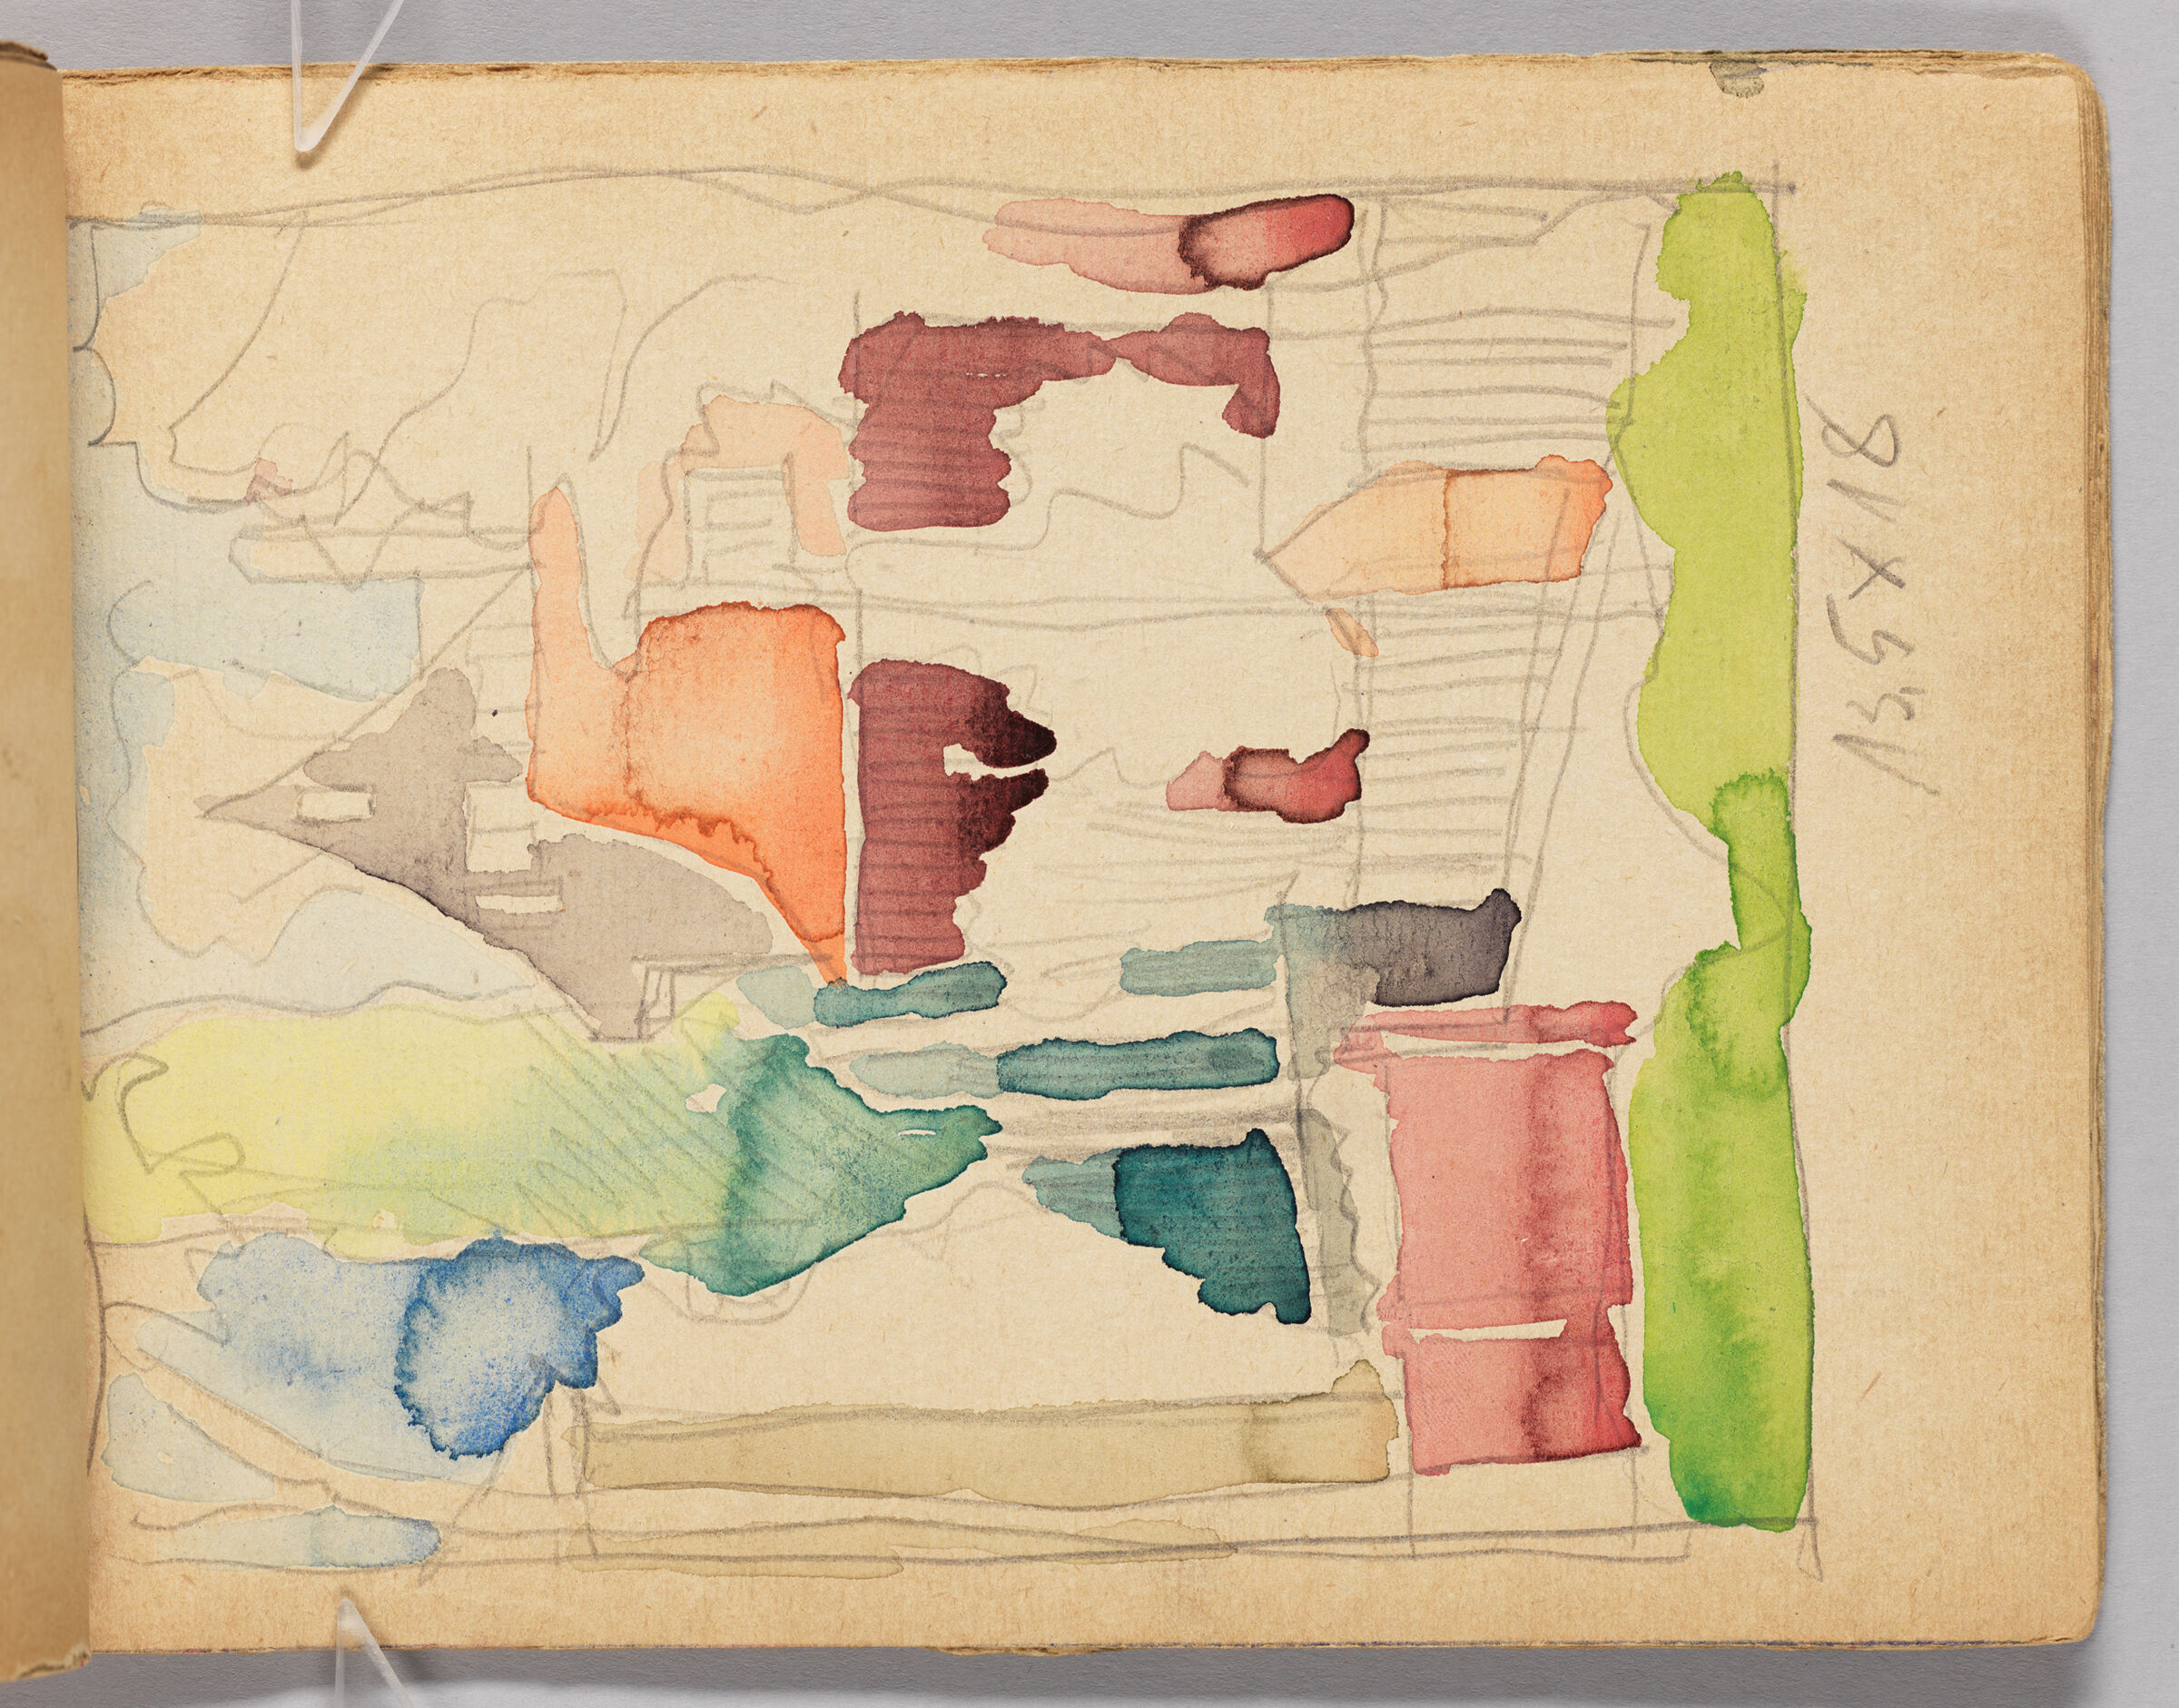 Untitled (Calculations, Left Page); Untitled (Watercolor Sketch, Right Page)